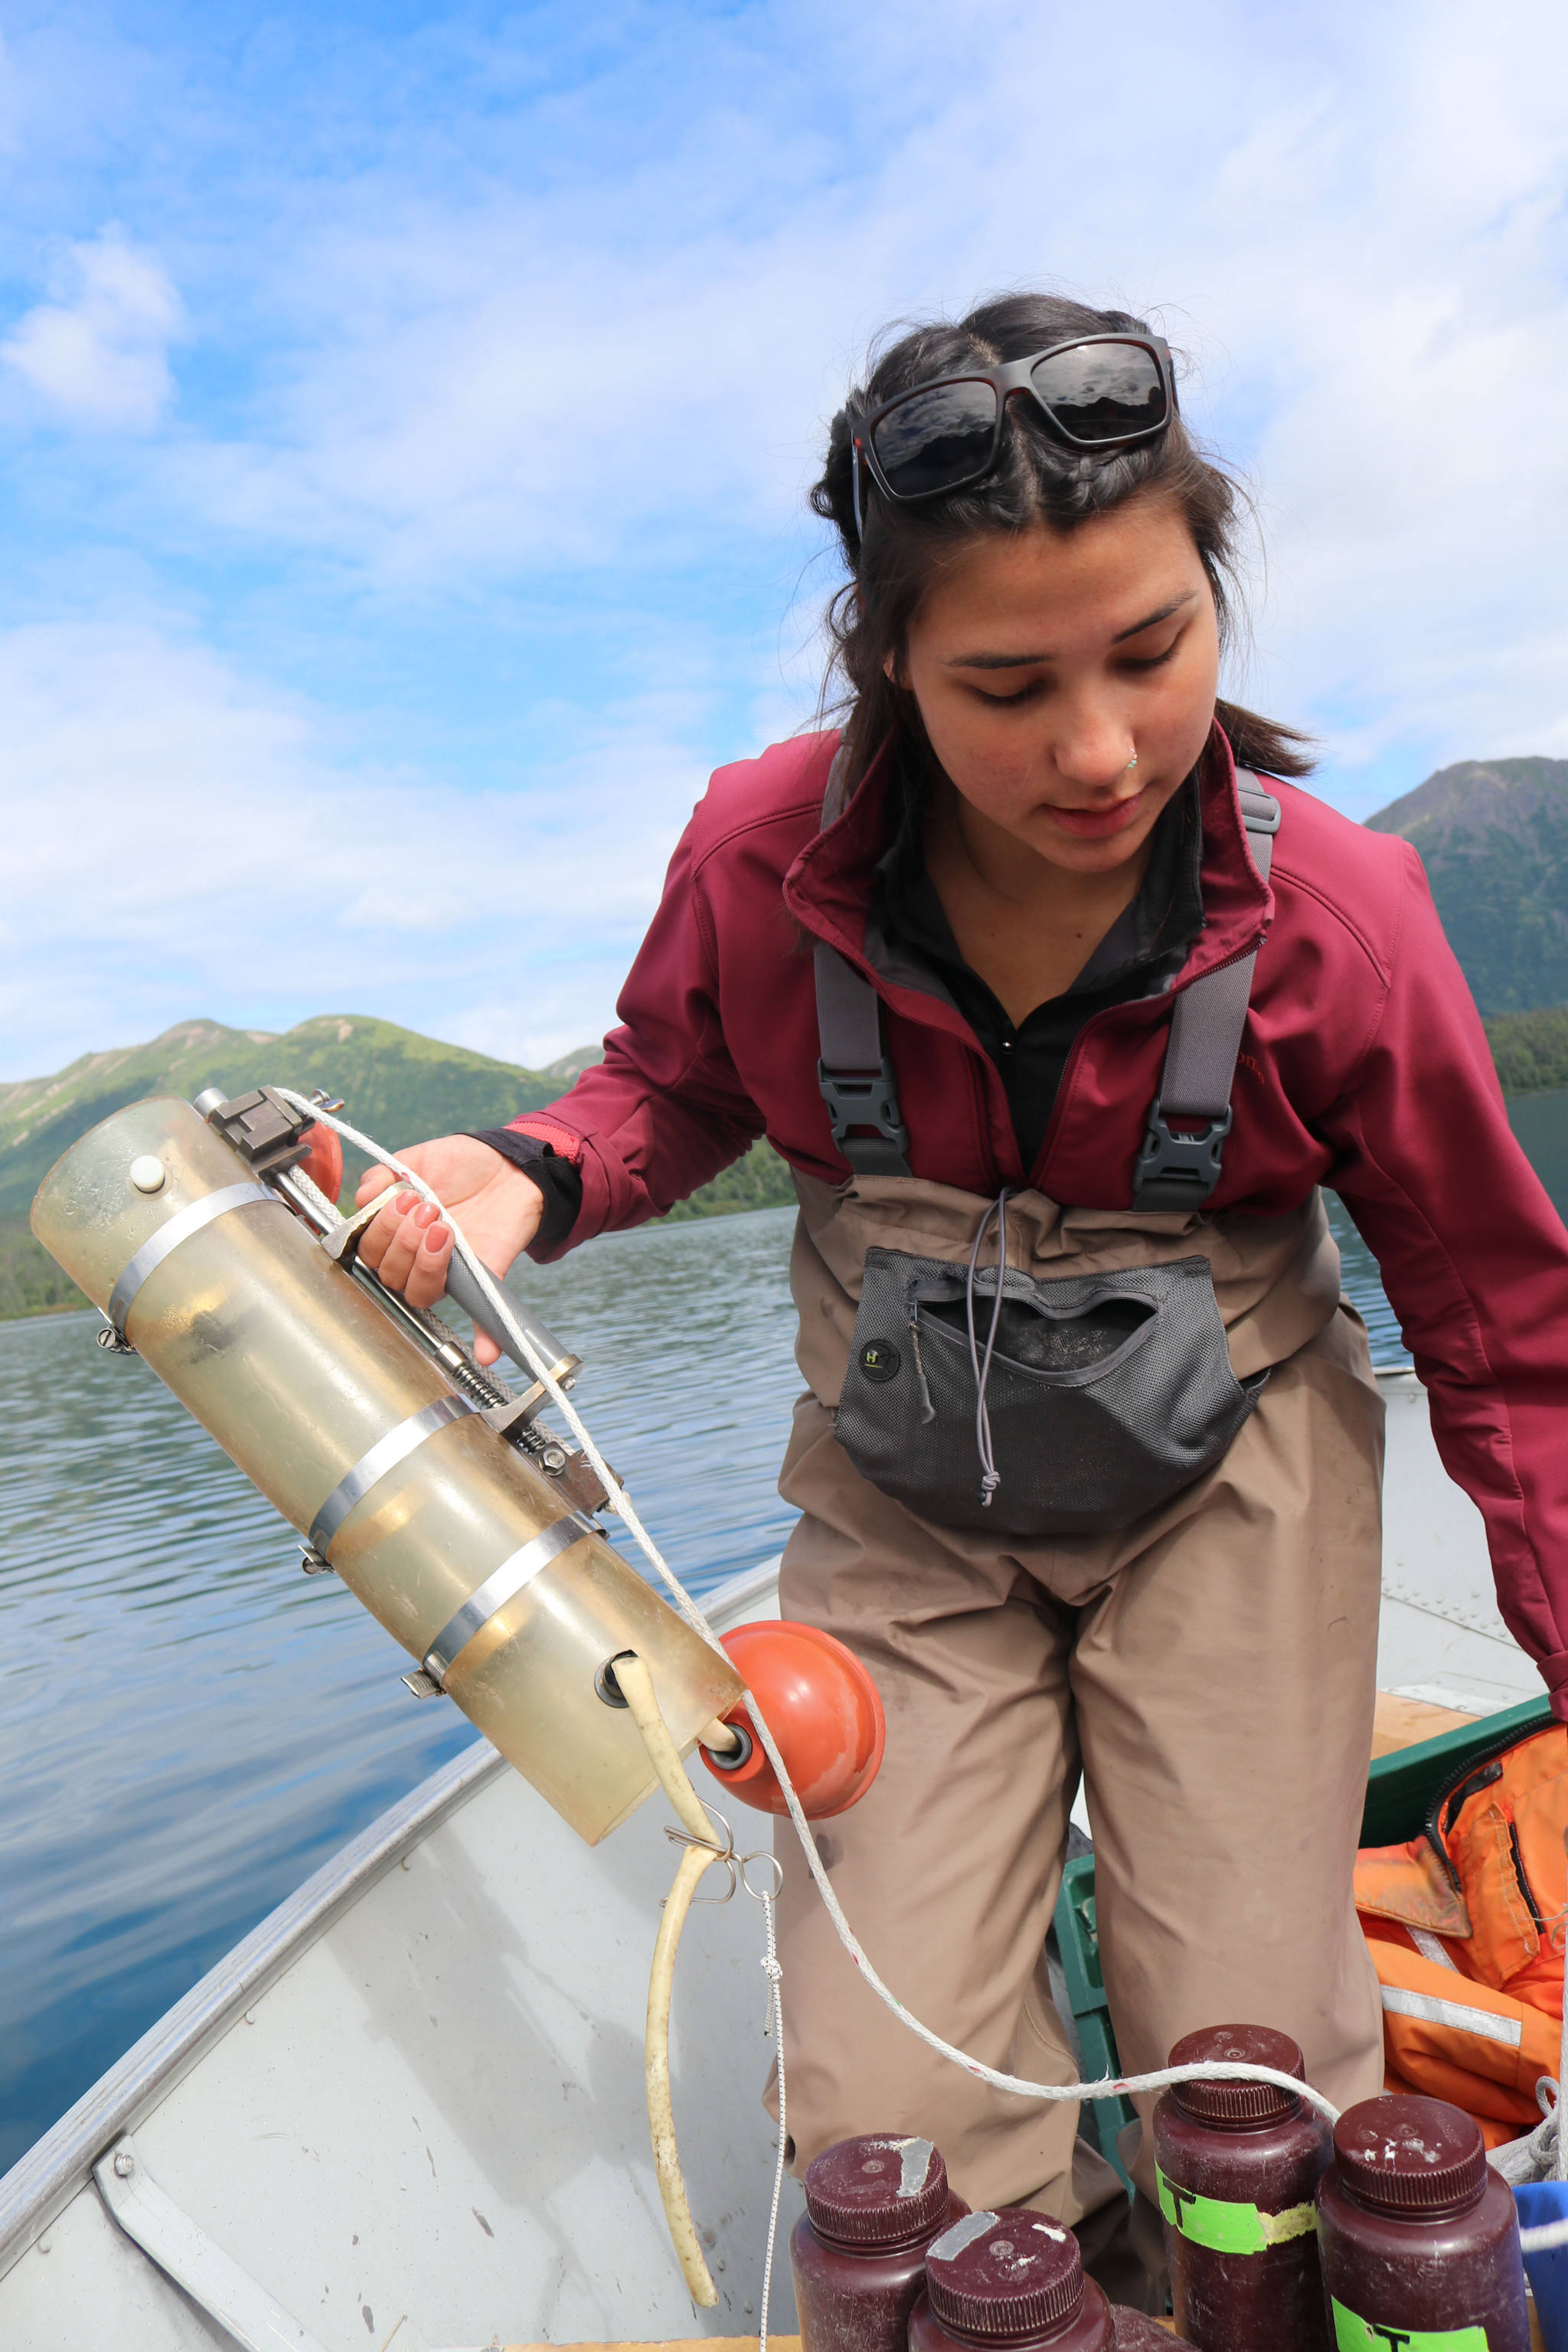 Danielle Lowrey, a Bristol Bay Native Association intern from Bethel, prepares a Van Dorn, which takes water samples that will later be filtered for algae concentration, on Kulik Lake in the Bristol Bay watershed on August 9, 2018. Mary Catharine Martin | SalmonState